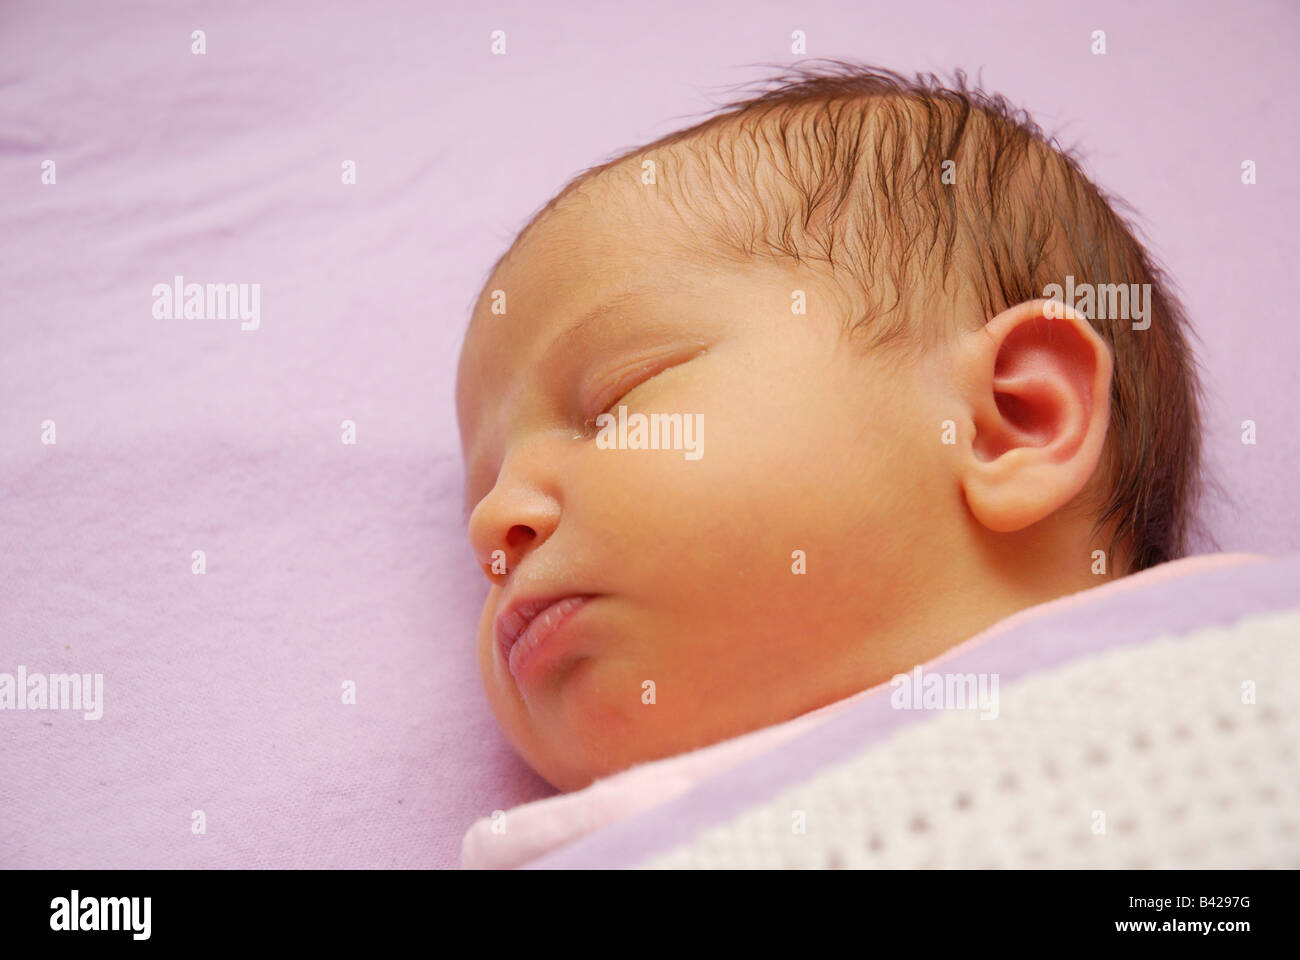 A one week old baby asleep under blankets Stock Photo